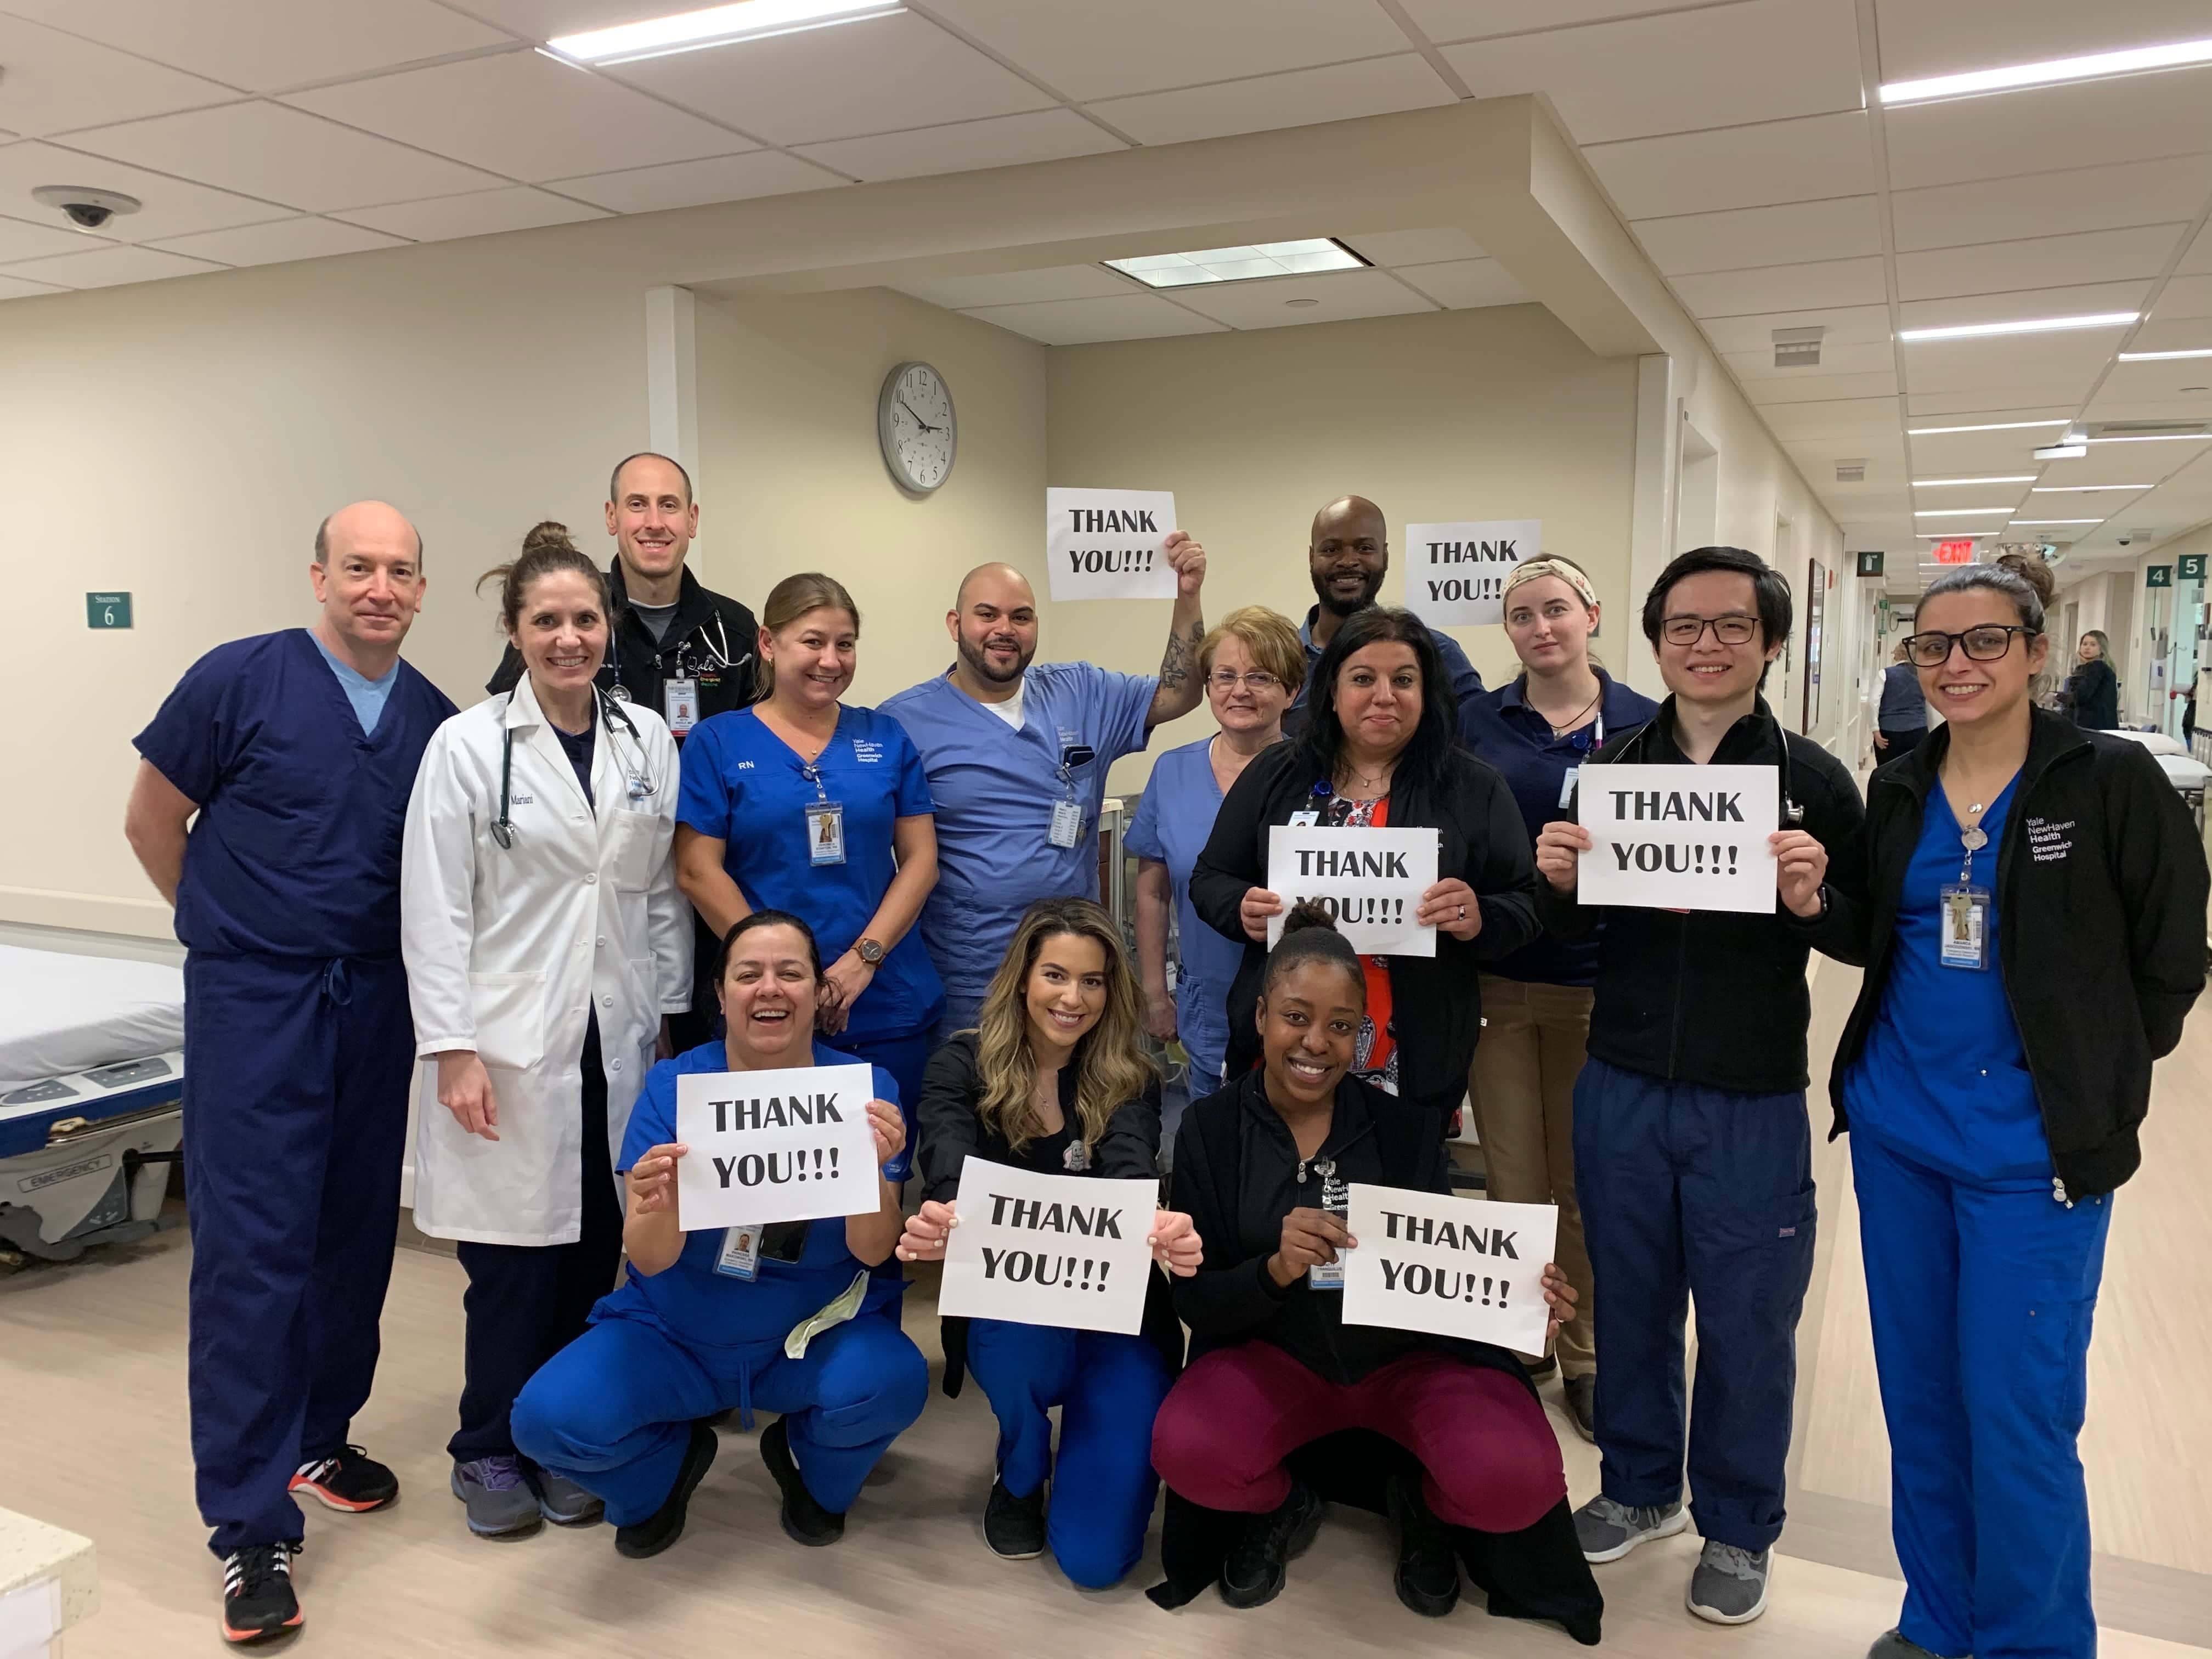 greenwich-hospital-emergency-department-staff-expressed-their-gratitude-for-the-acts-of-kindness-from-the-community-they-serve